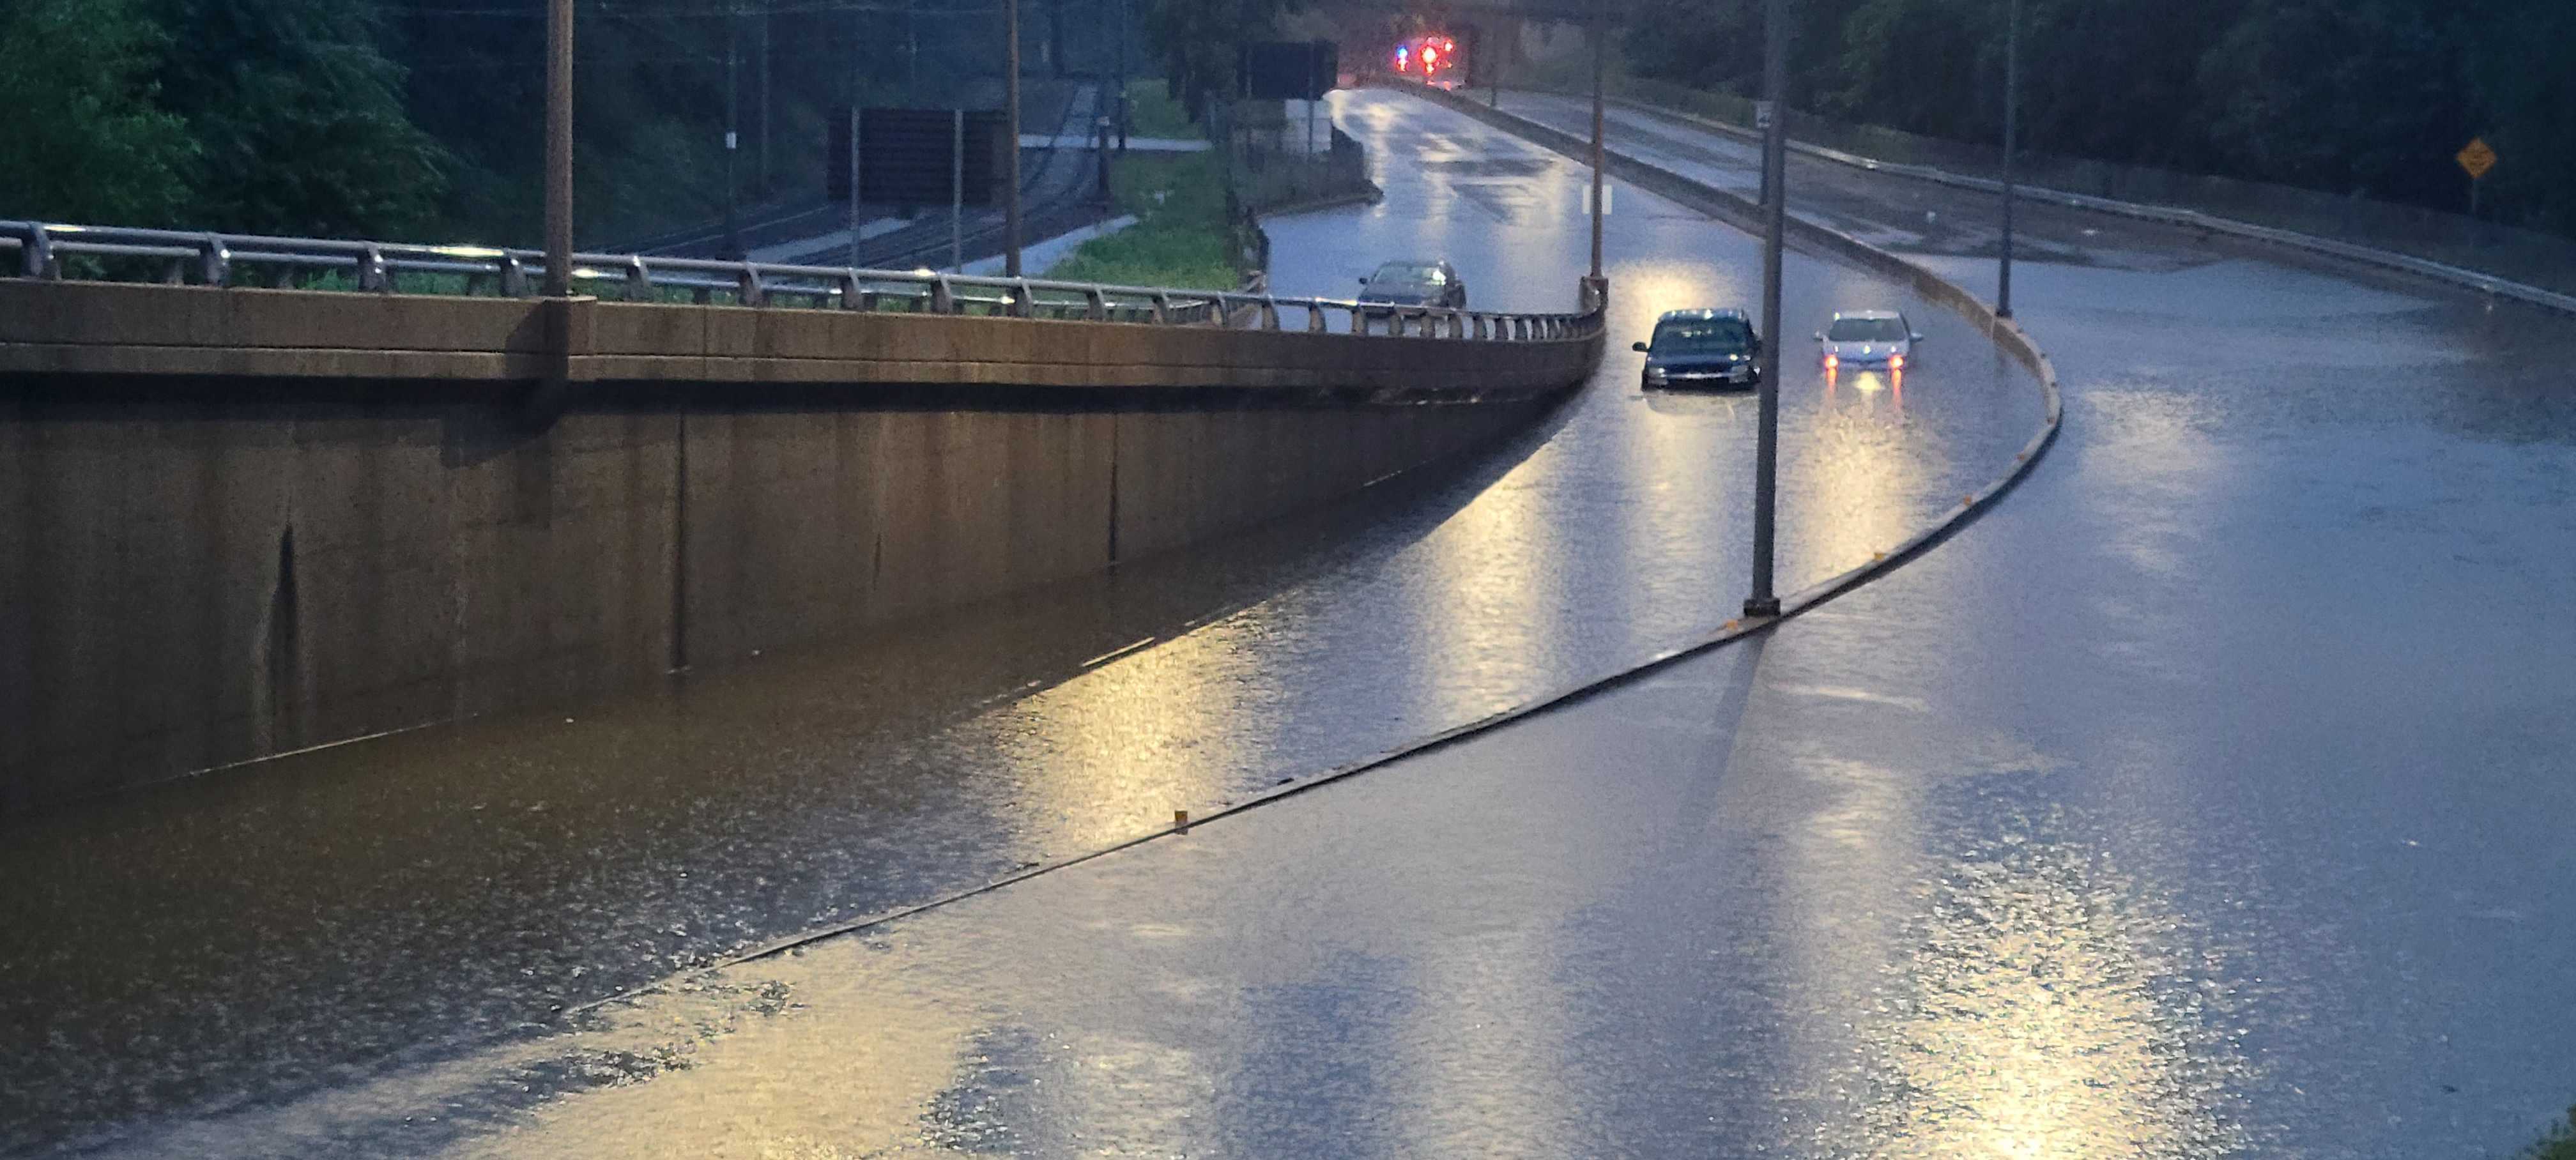 Flooding at Forest Park Parkway and Union Blvd. in St. Louis, MO.